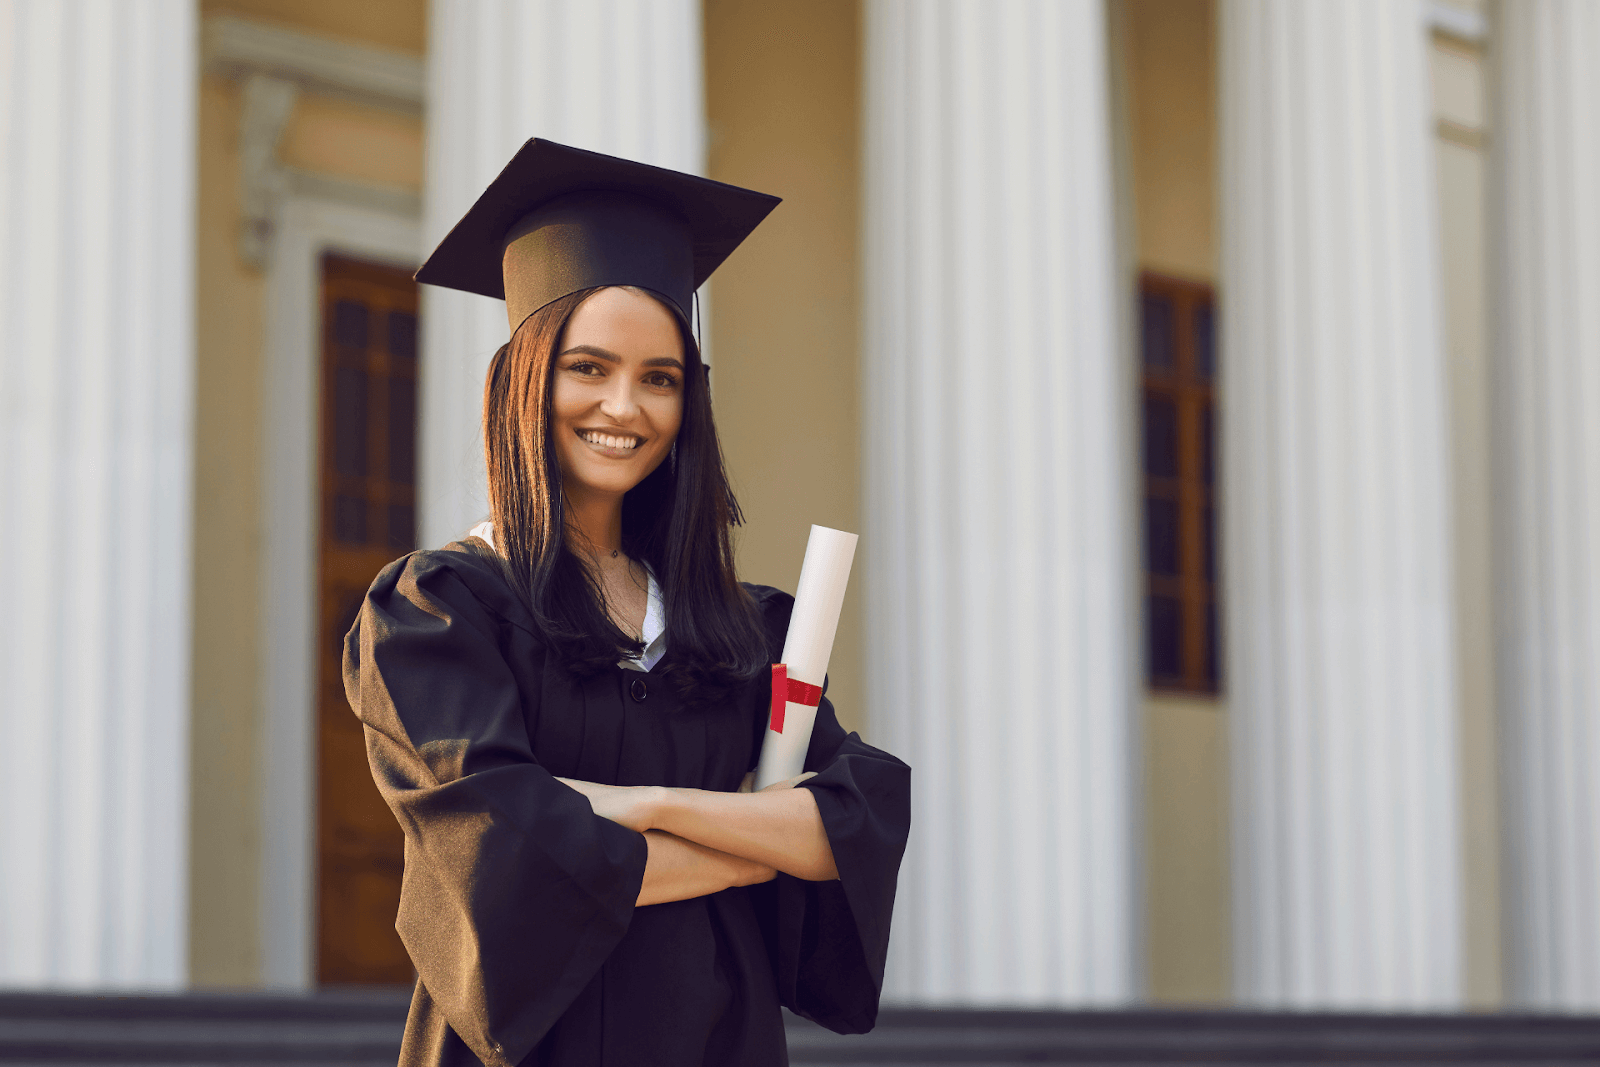 A smiling young woman in a graduation cap and gown with her diploma